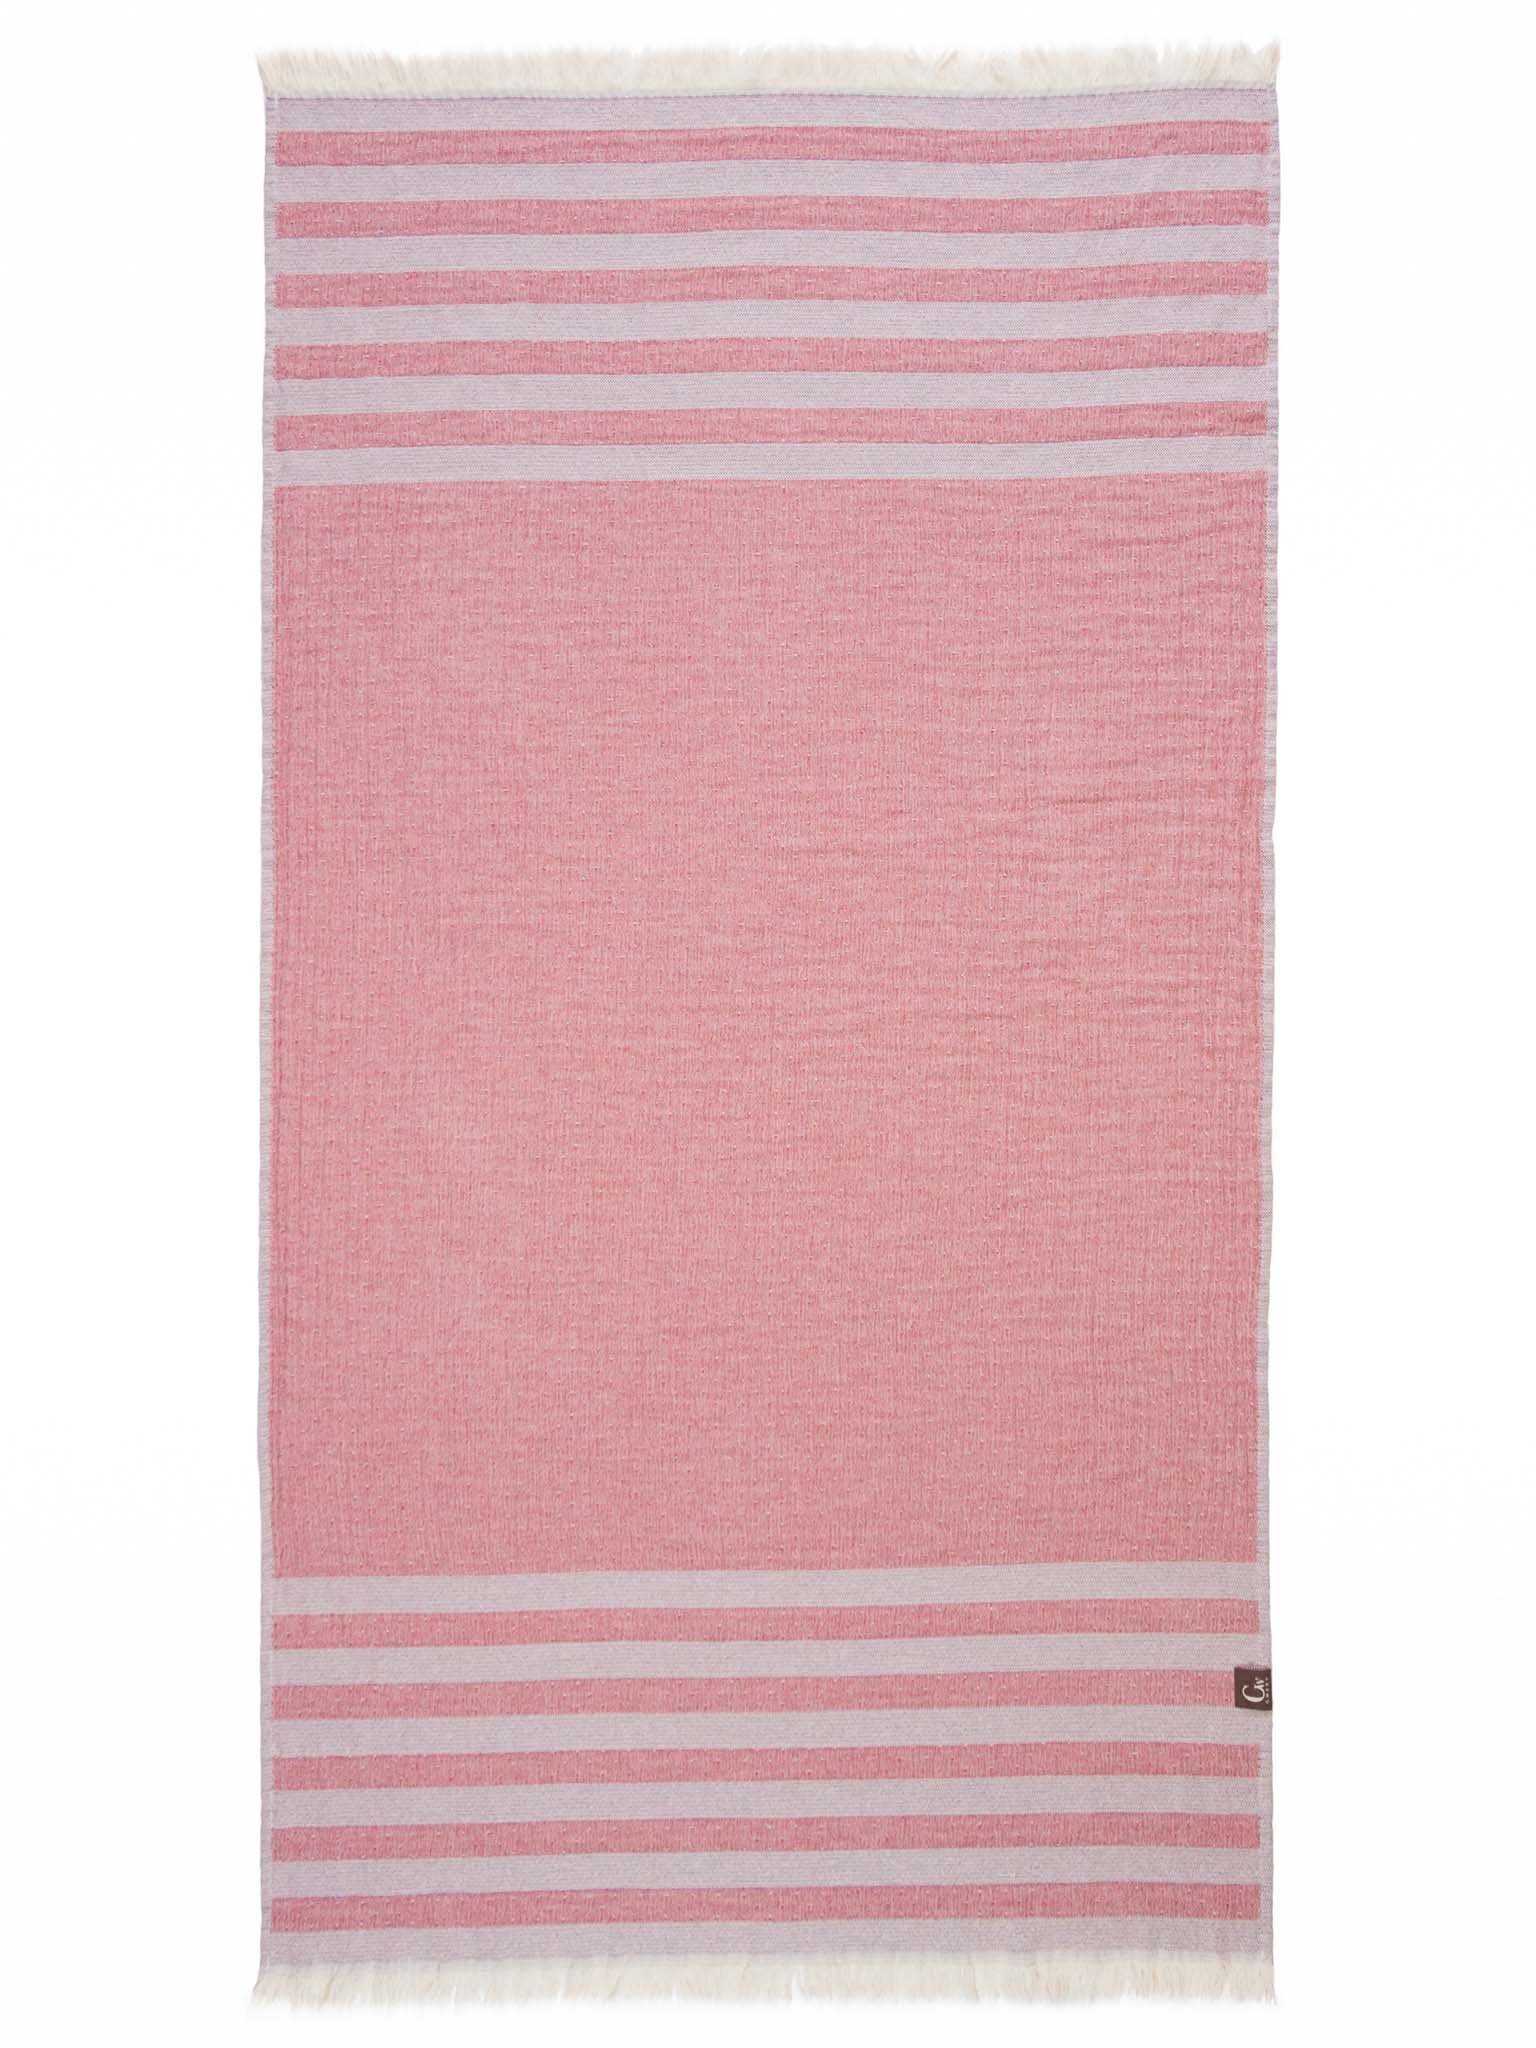 Red and blue double sided striped beach towel open up showing red side